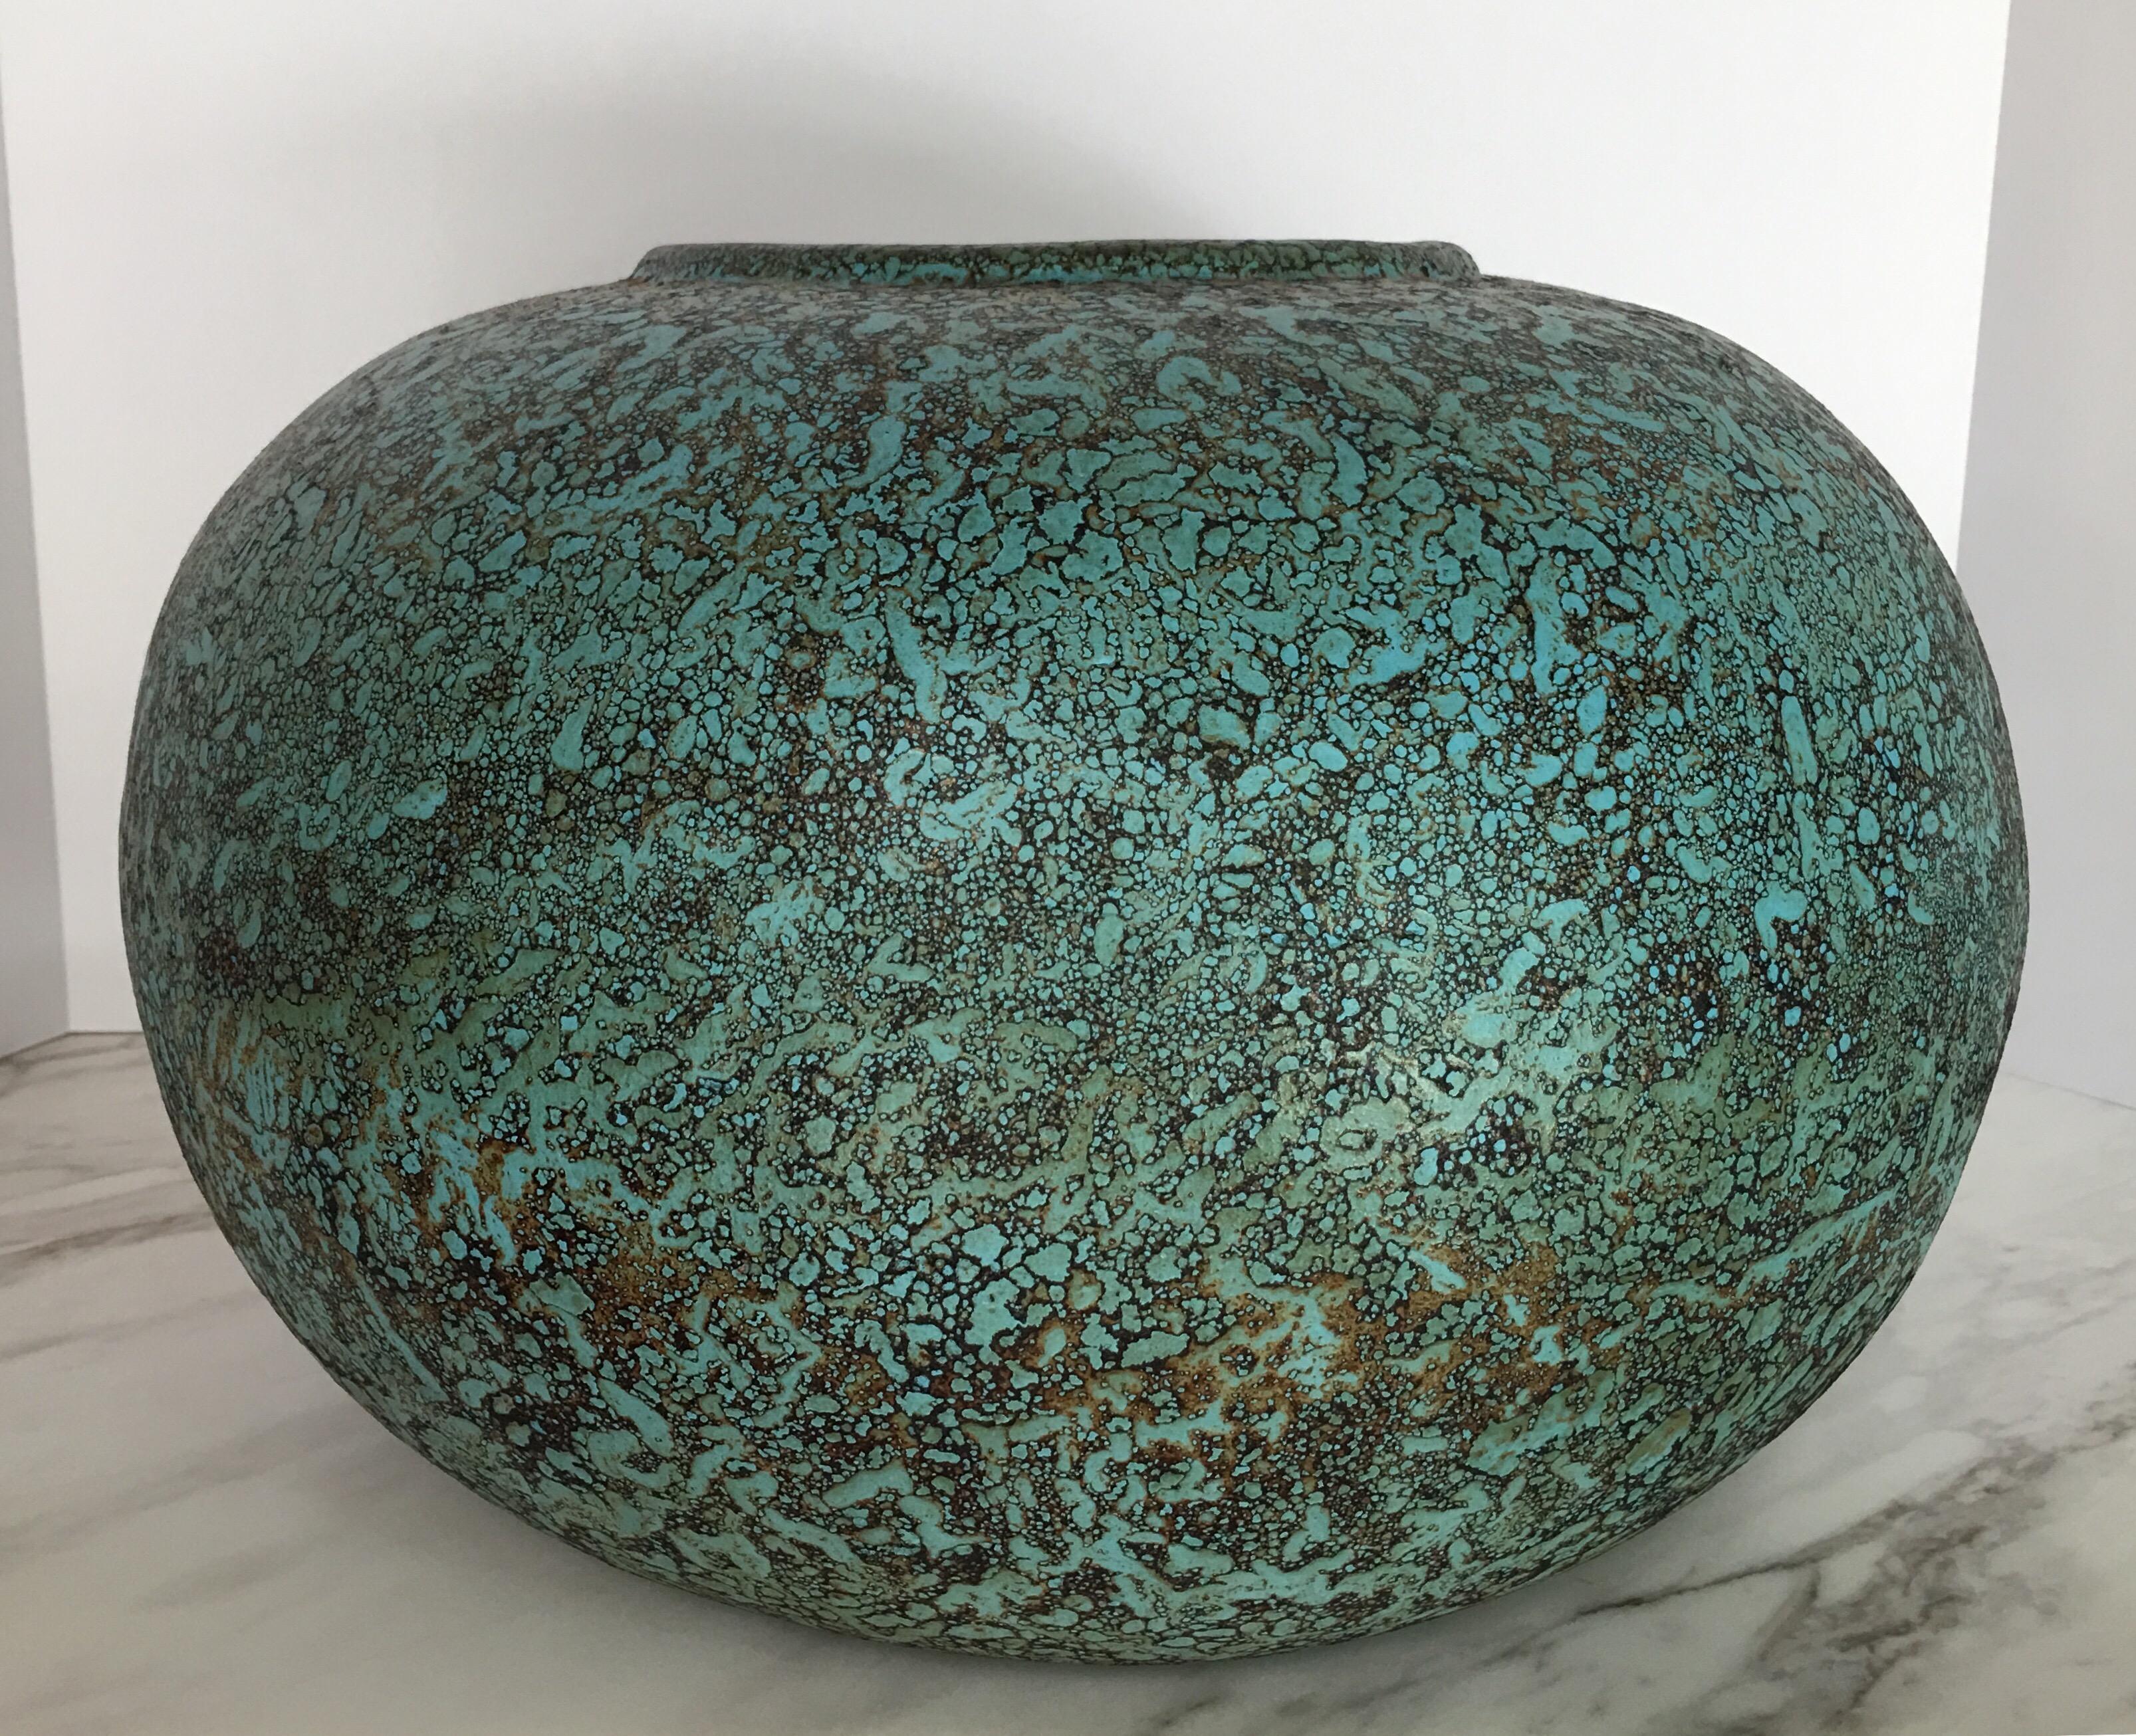 Large round handmade terracotta vase featuring a textural turquoise verdigris-like finish with brown/black burned details. This large scale sculptural centerpiece vase or bowl is truly a statement accessory.